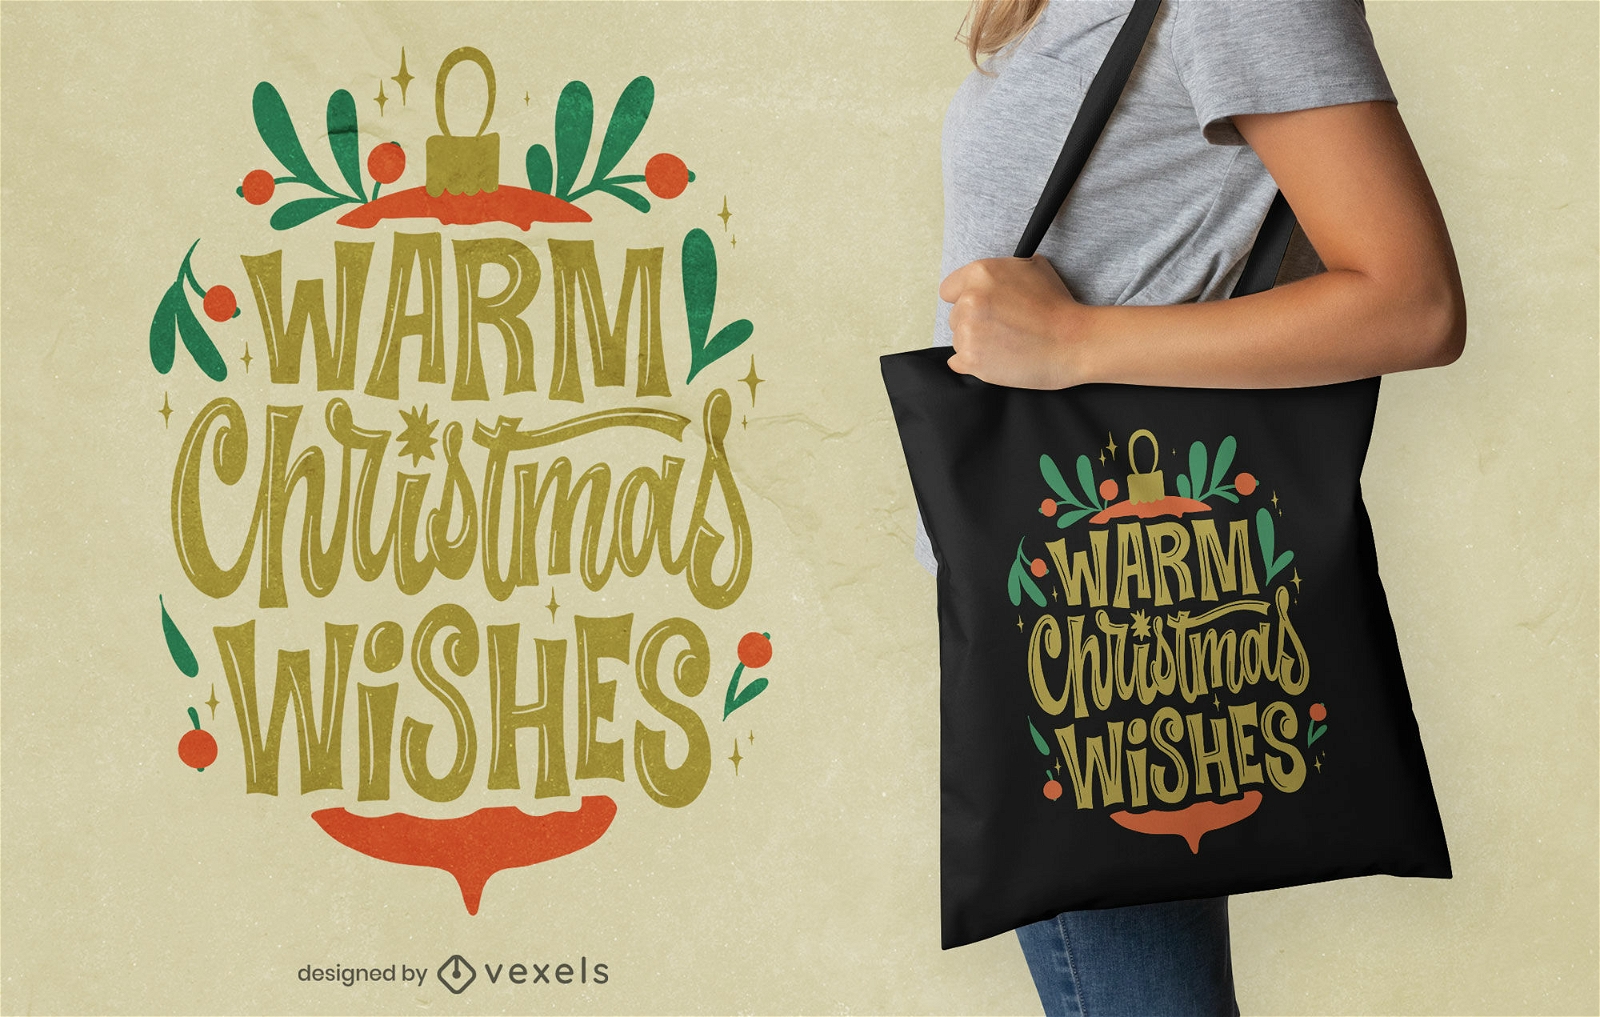 Warm Christmas wishes tote bag design